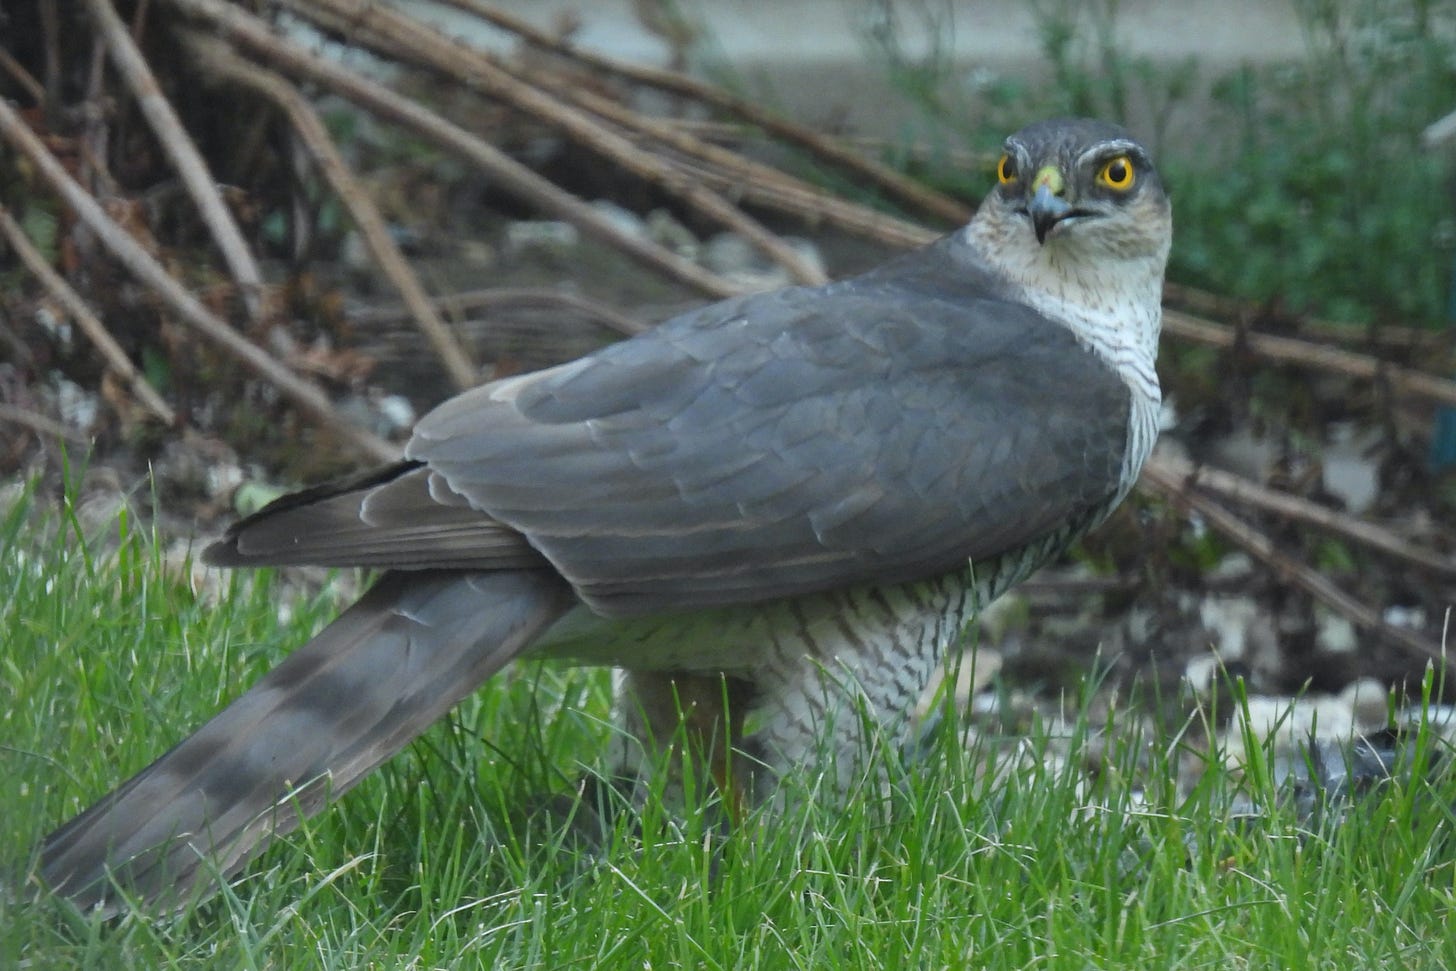 Sparrowhawk on garden lawn, facing to the right and looking back at us over its shoulder. Yellow eyes really noticeable. Twigs and green leaves in the background. 